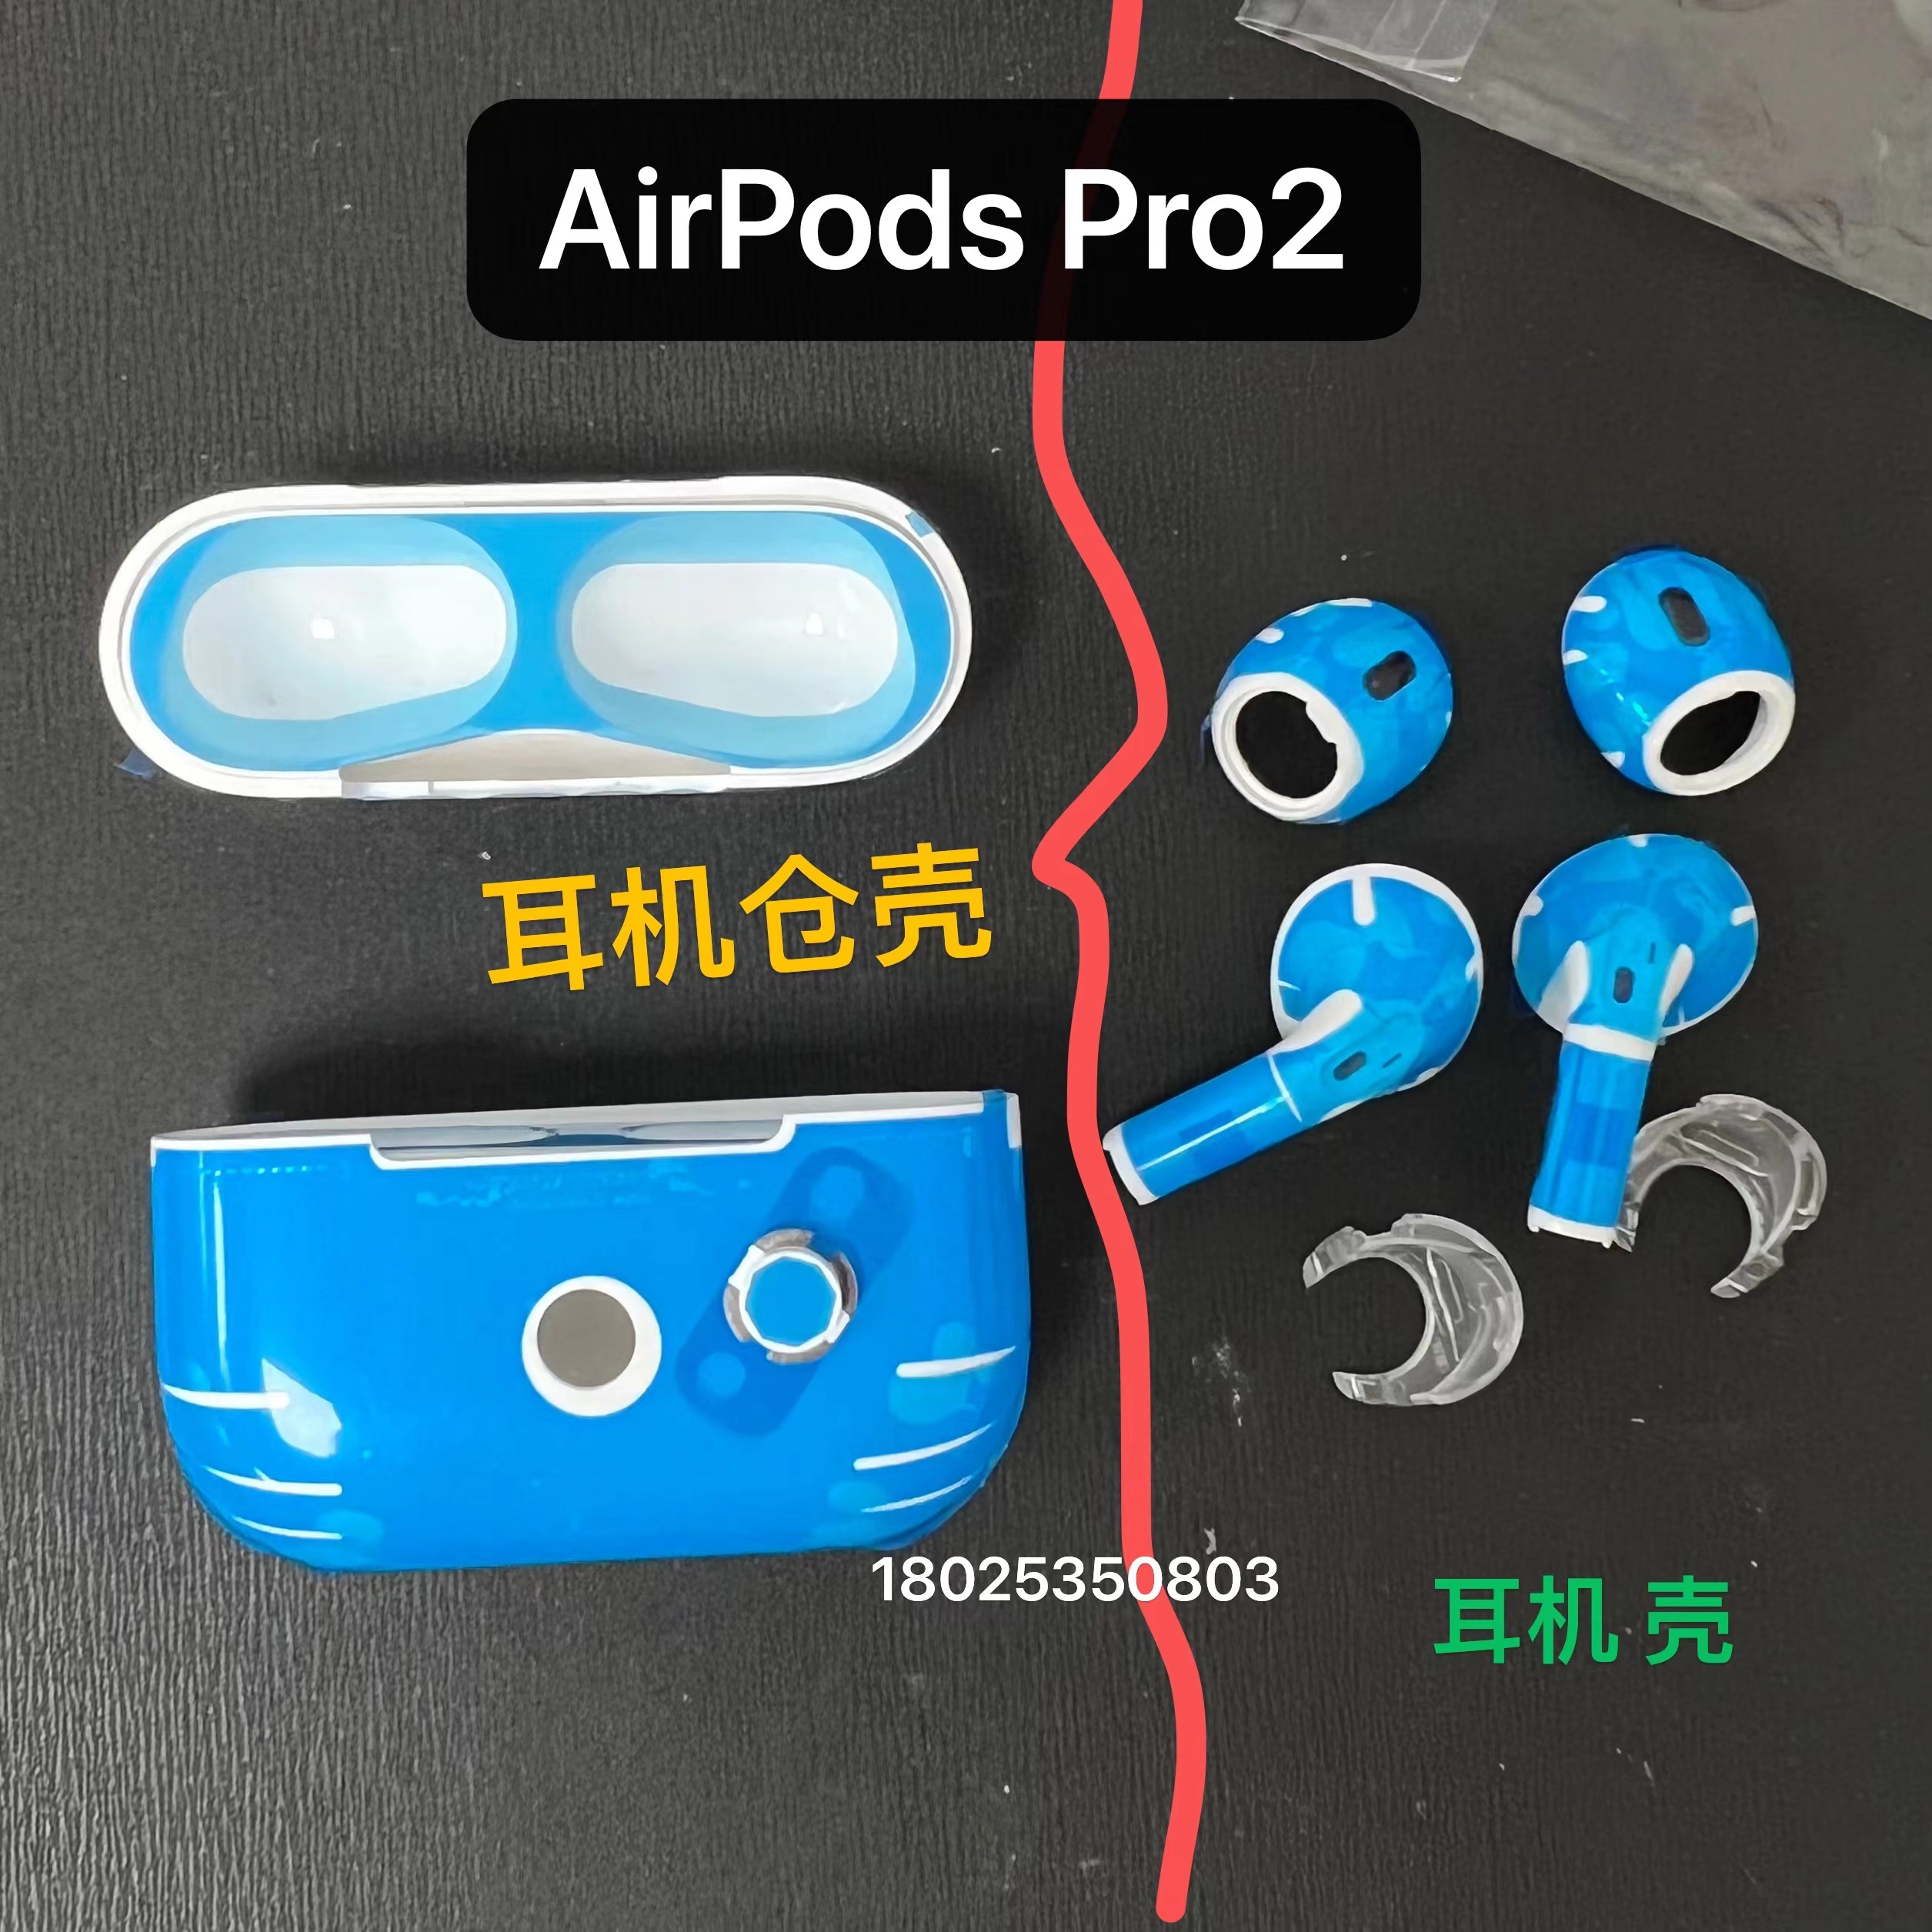 AirPods Pro2  |  AirPods Pro (2nd generation)